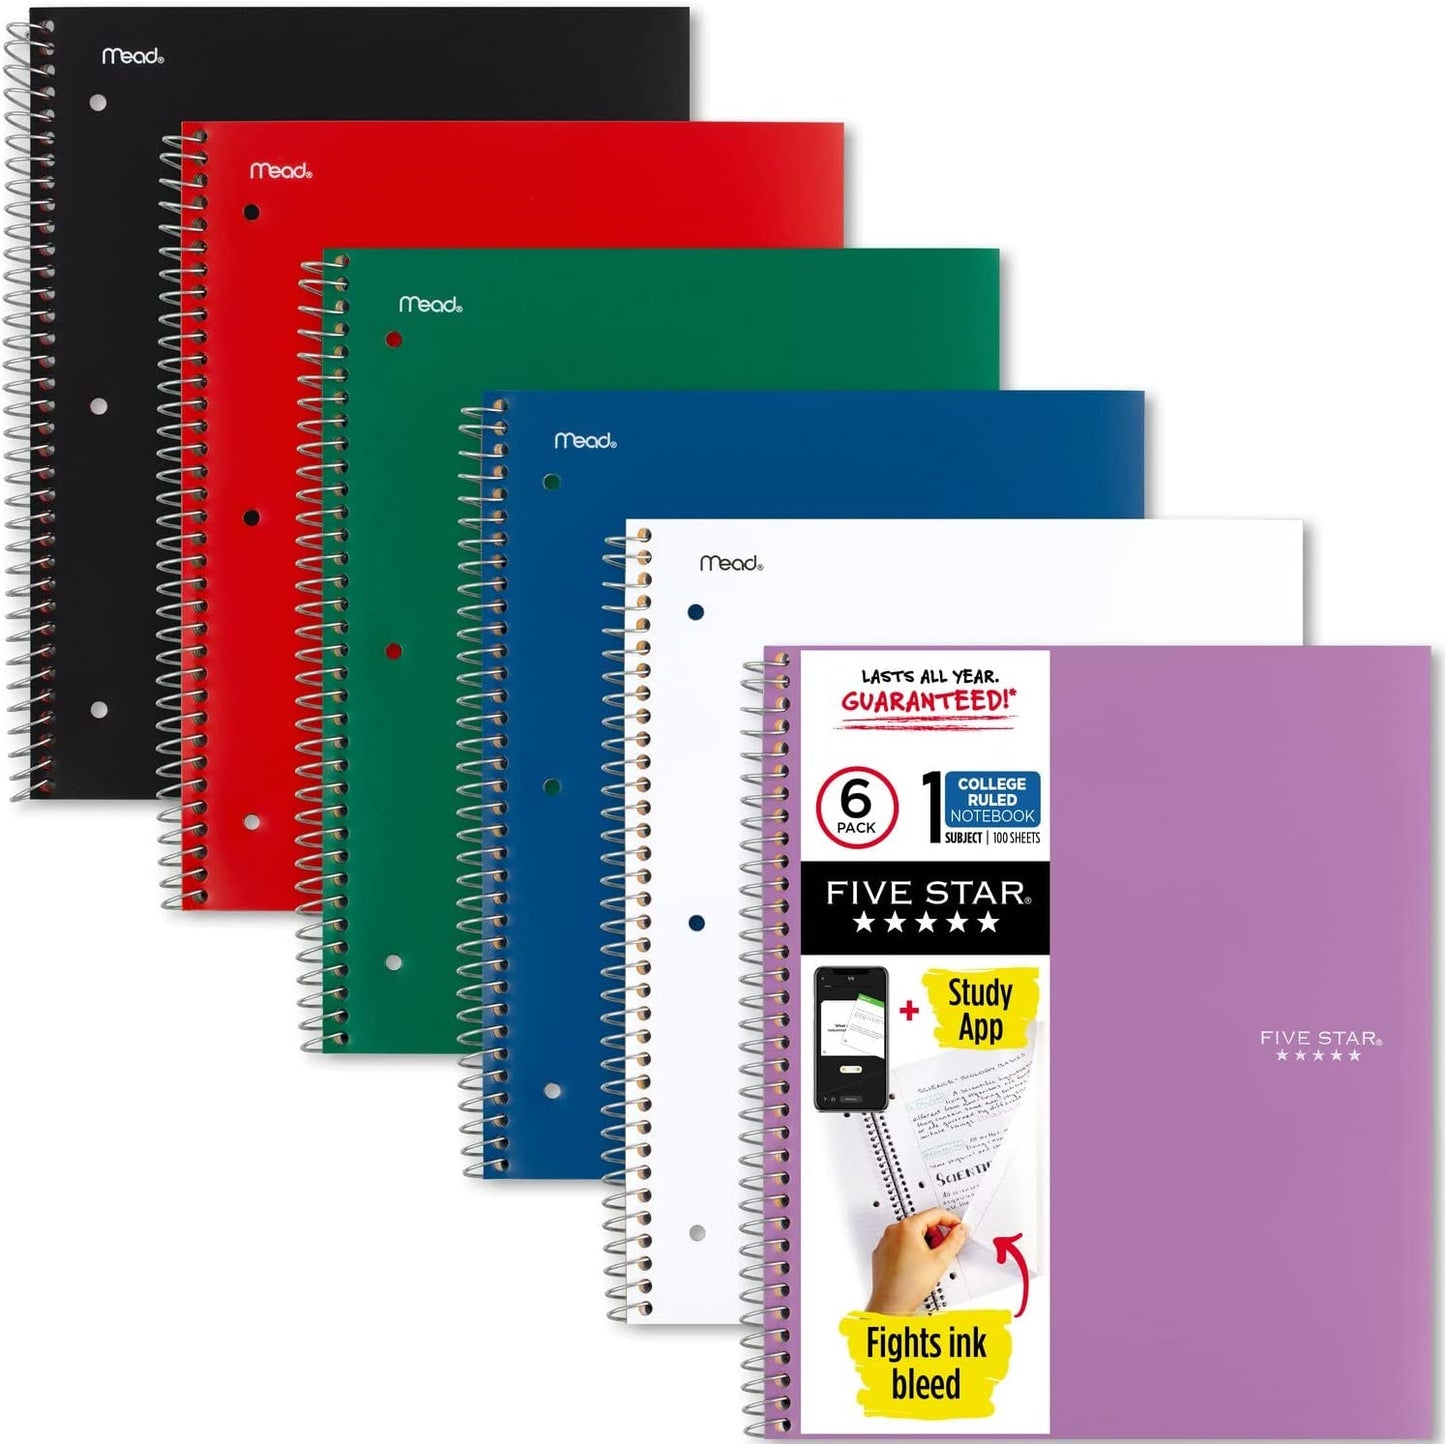 Spiral Notebook + Study App, 6 Pack, 1 Subject, College Ruled Paper, 8-1/2" X 11", 100 Sheets, Fights Ink Bleed, Water Resistant Cover, Black, Red, Blue, Green, White, Purple (38052)